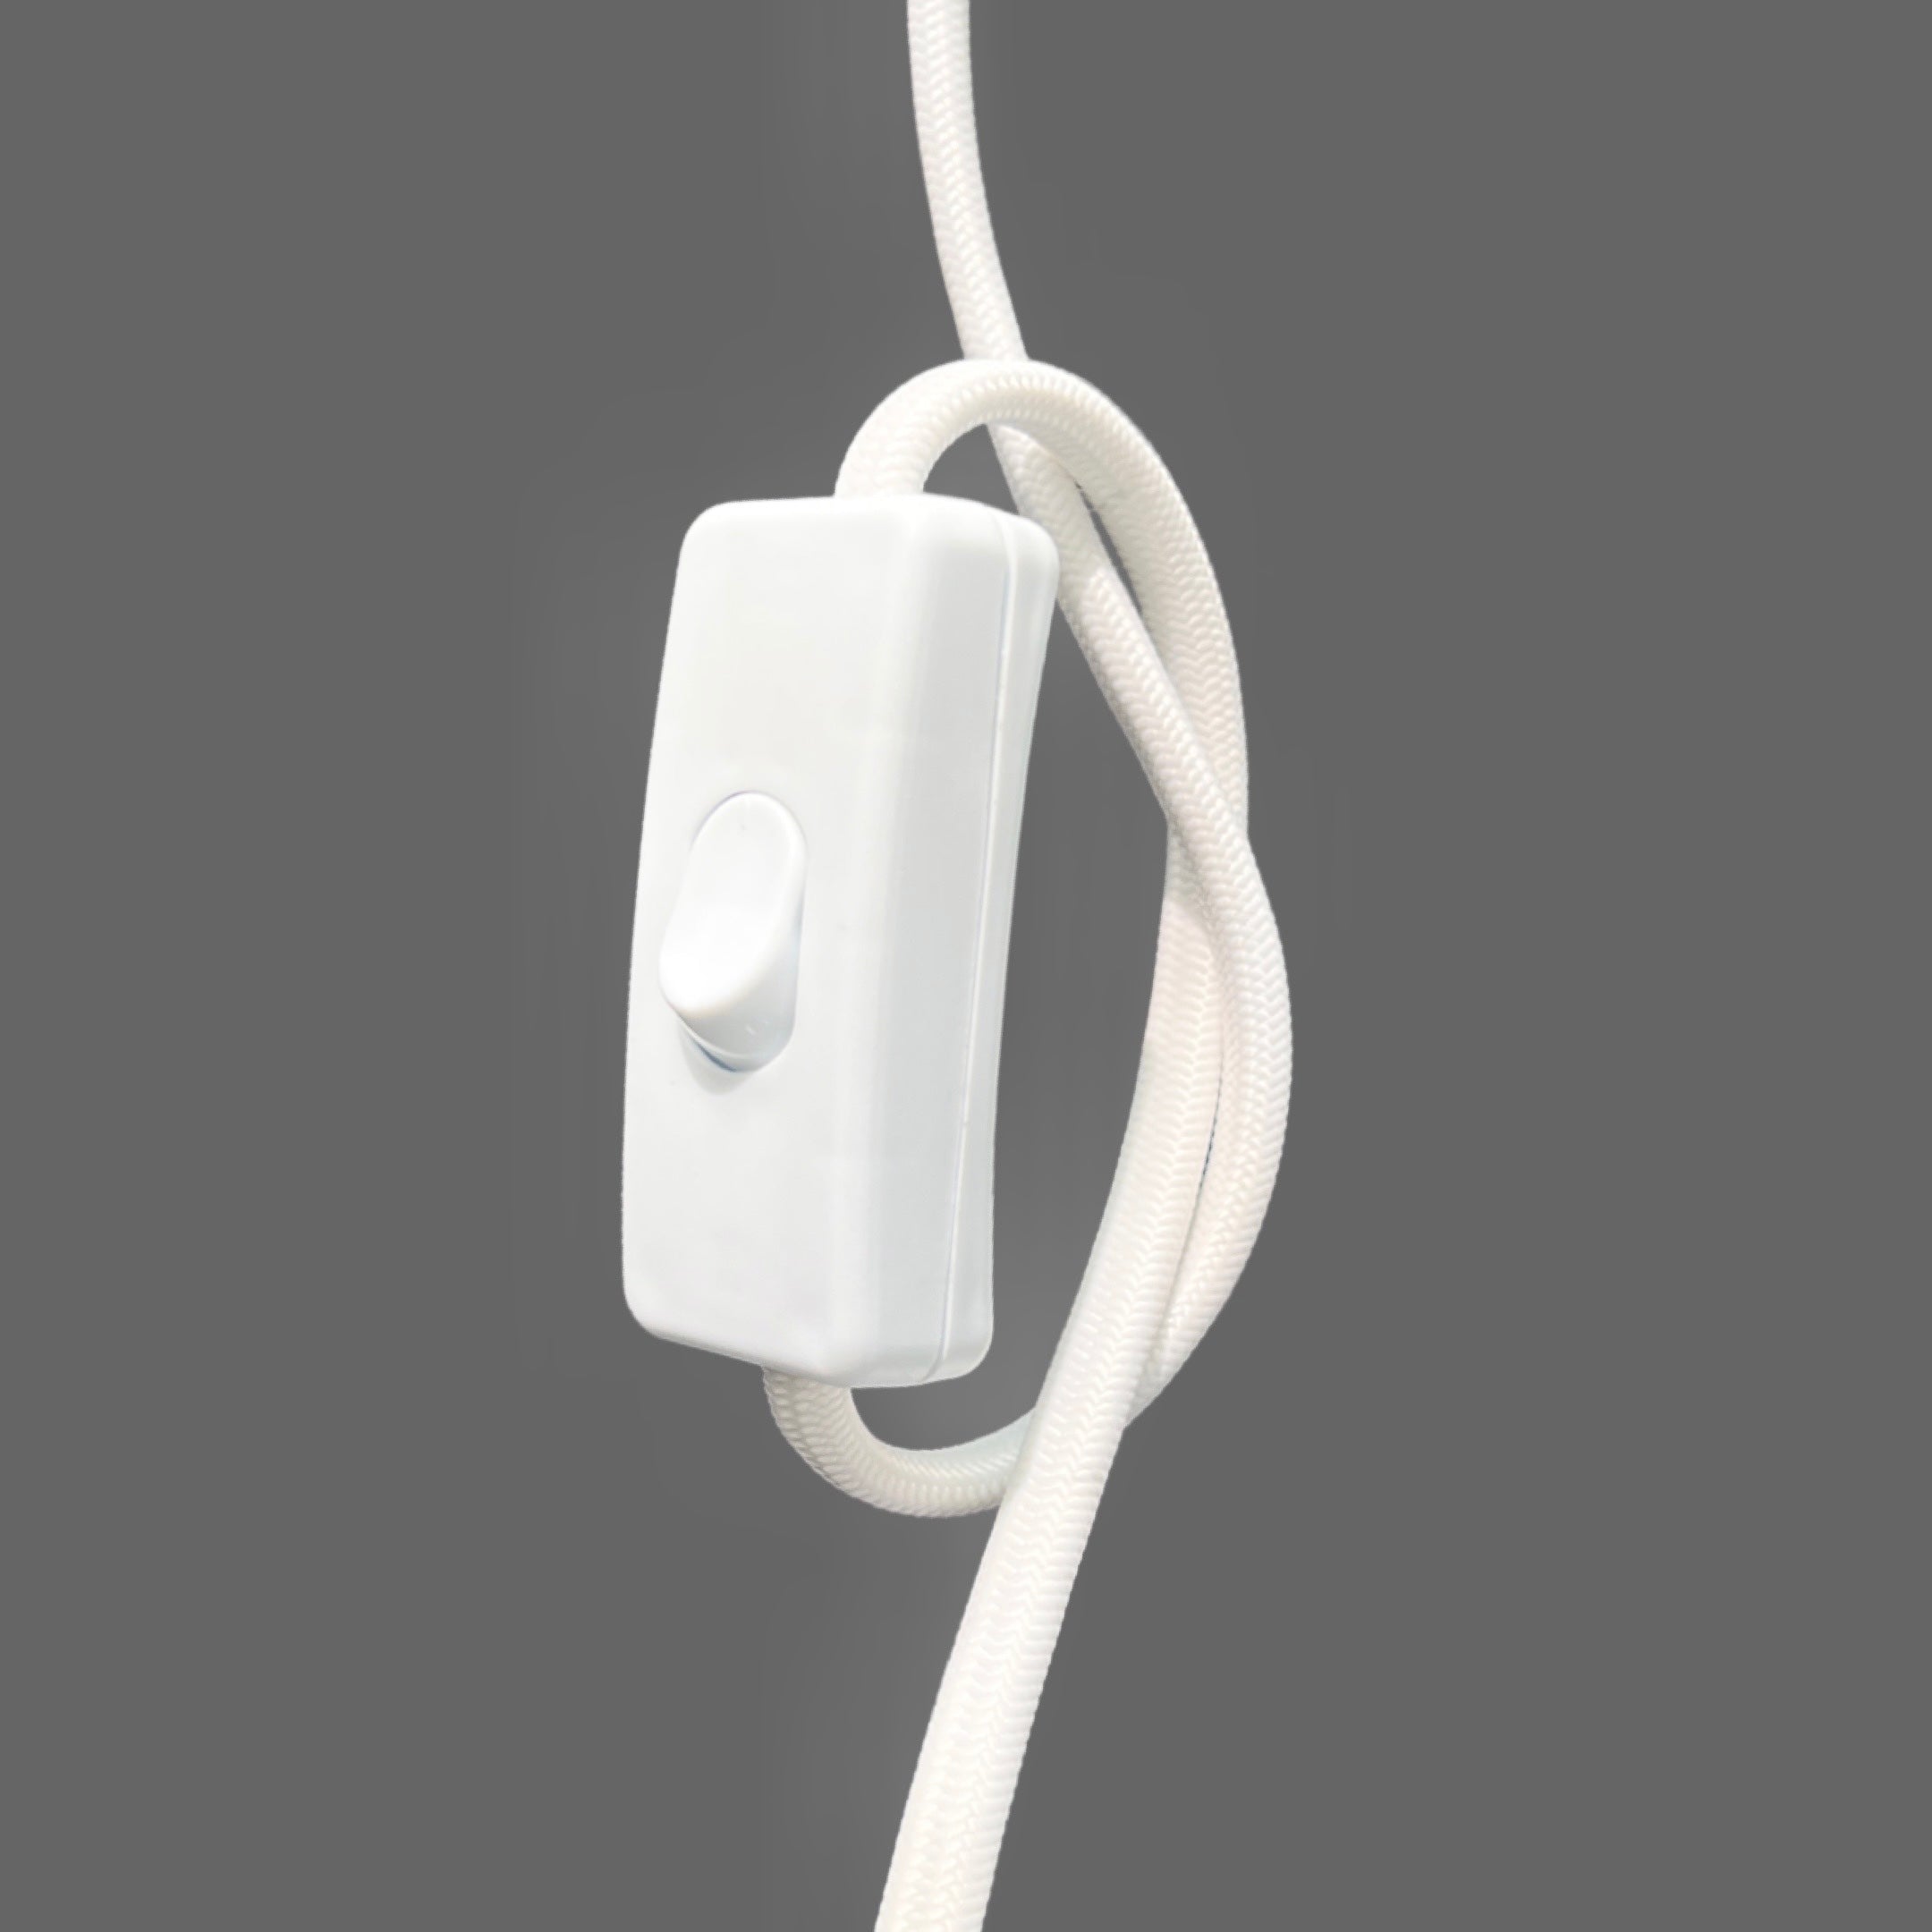 wall sconce plug-in cord and switch